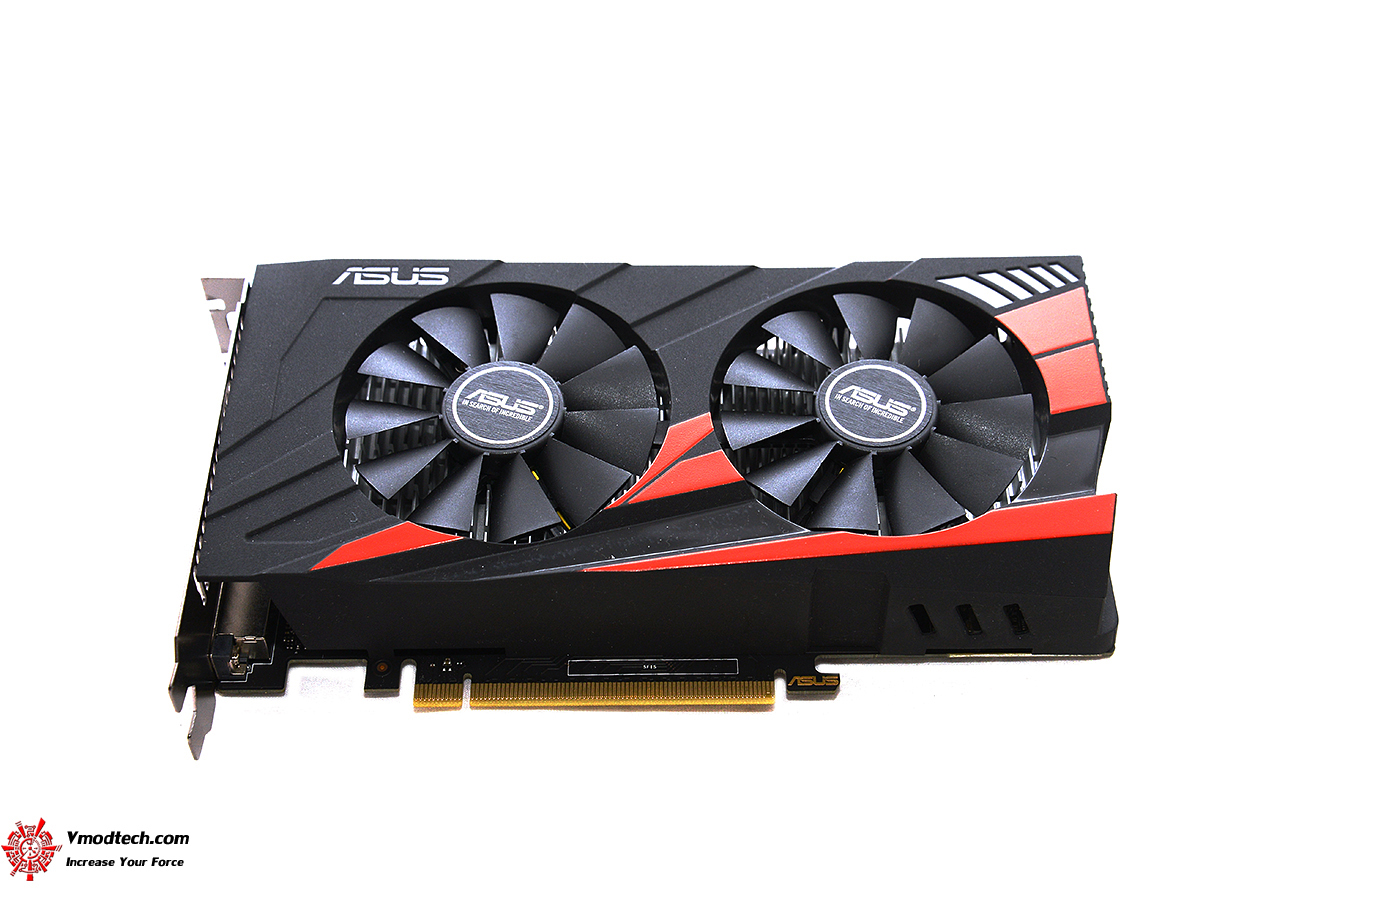 dsc 8779 ASUS EXPEDITION GeForce GTX 1050 eSports Gaming Graphics Card 2GB GDDR5 Review